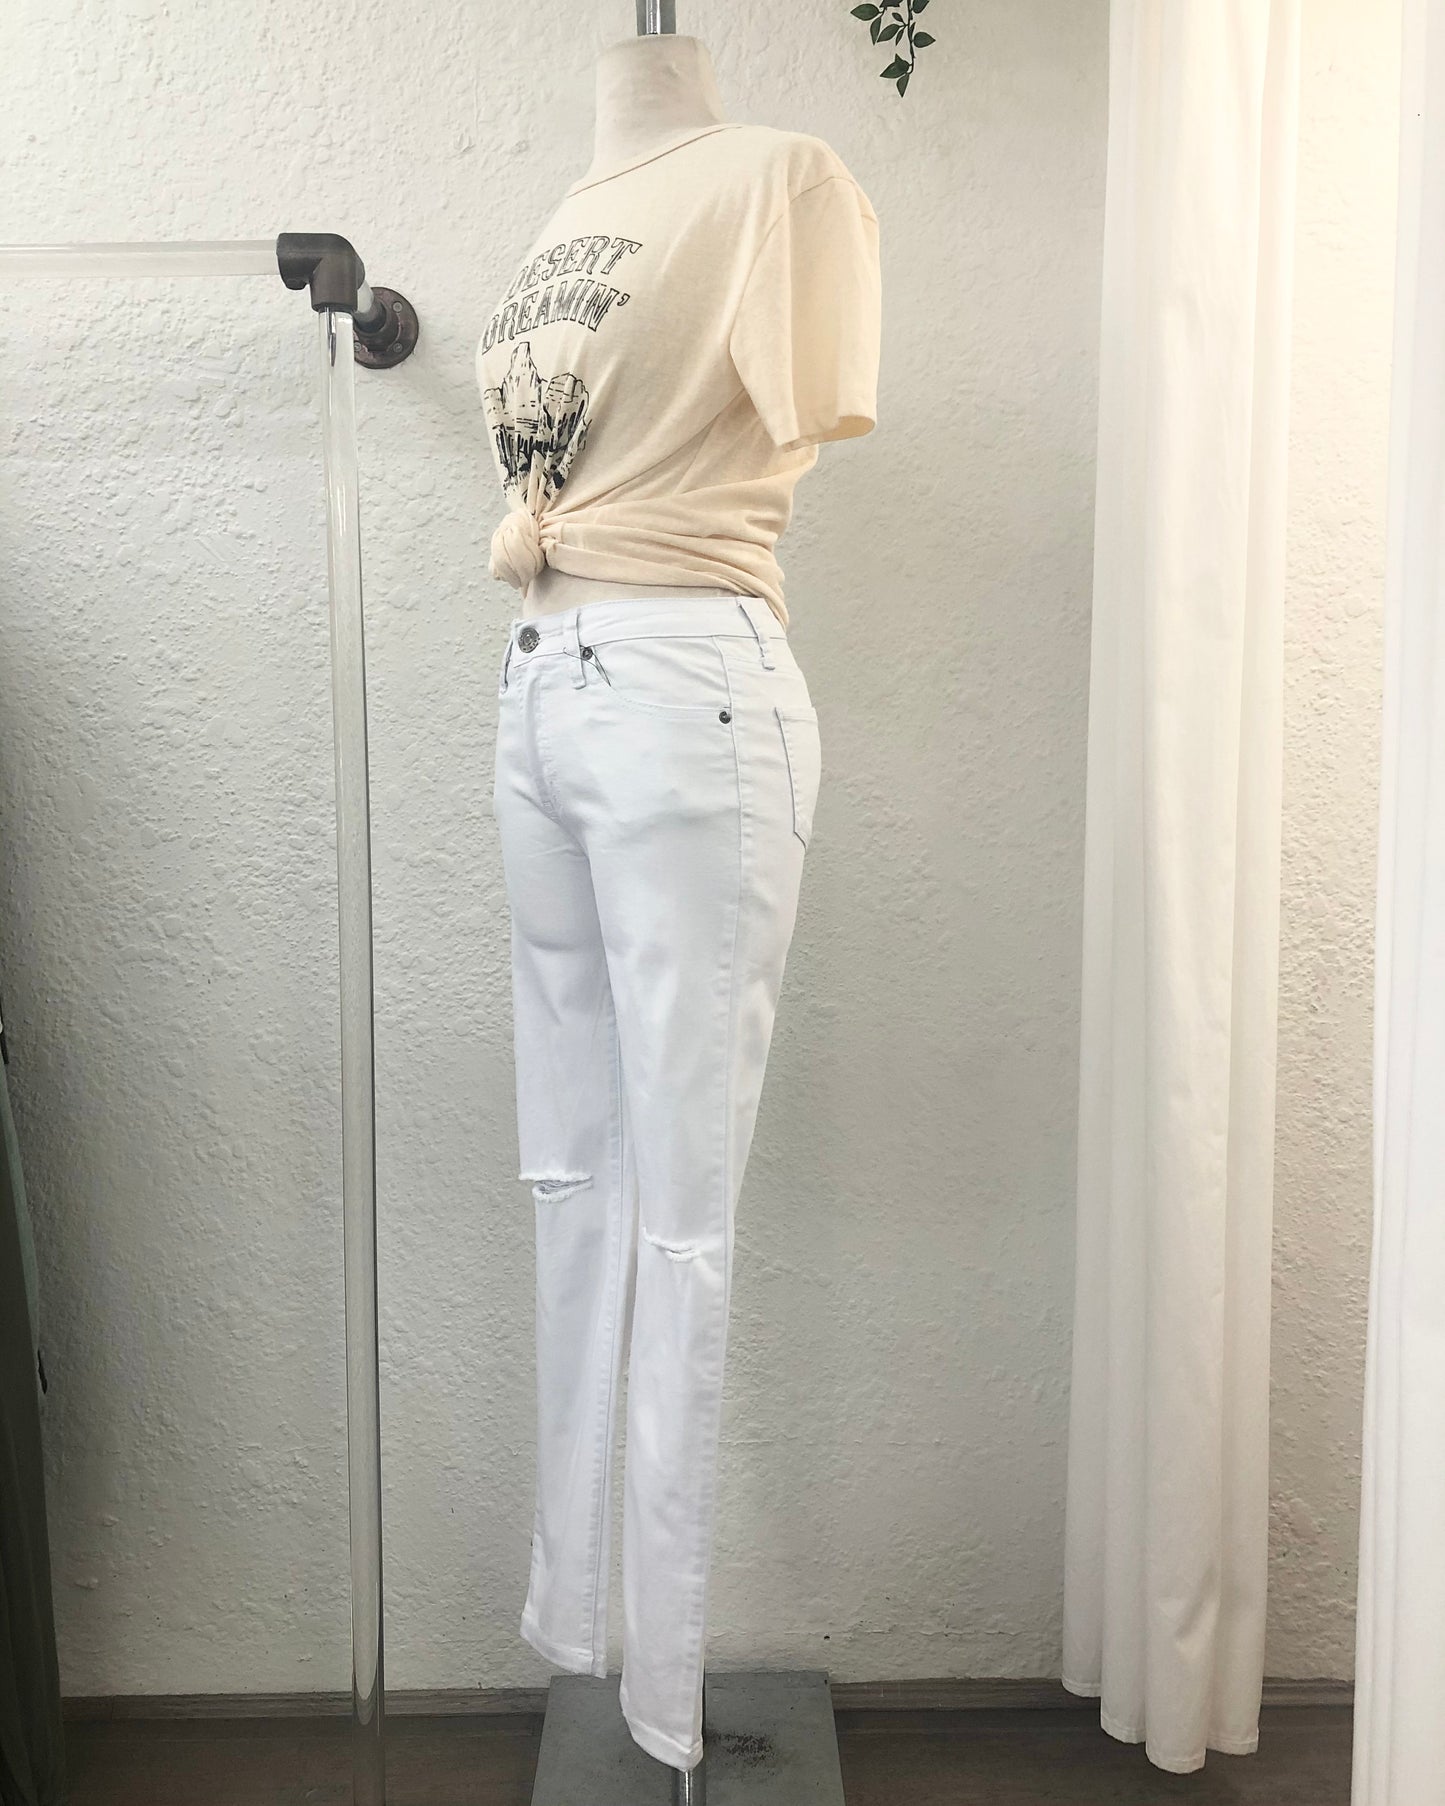 High Waisted Denim Jeans- White Rips On Knee